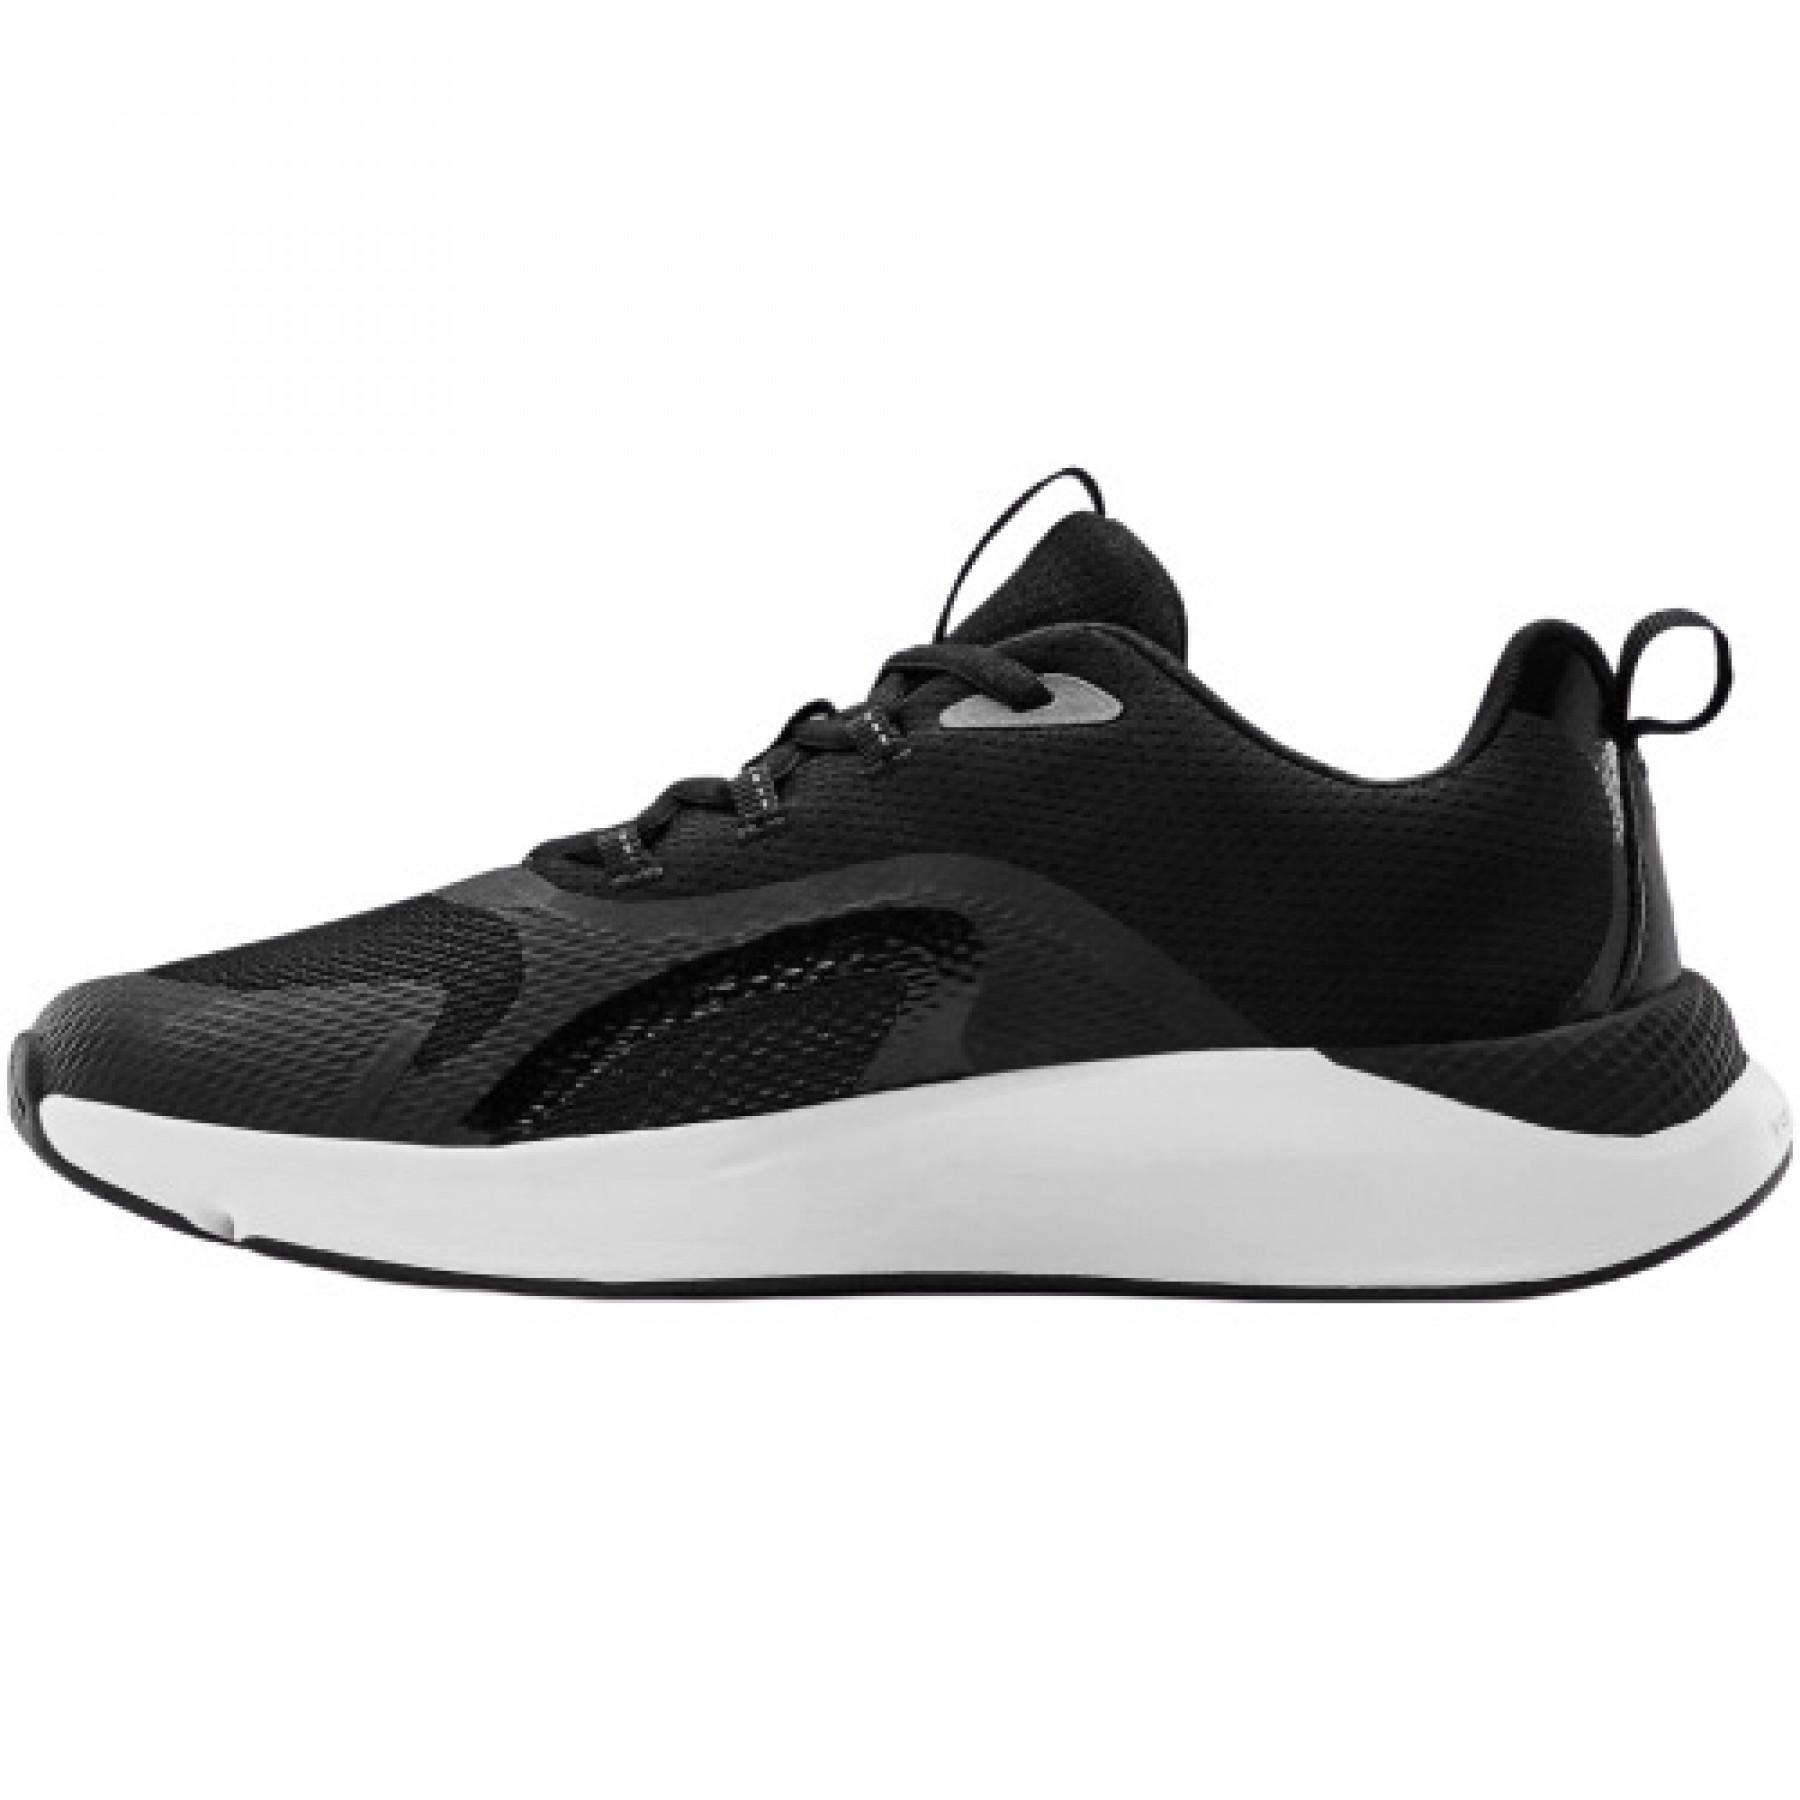 Zapatillas de deporte para mujeres Under Armour Charged RC Sportstyle